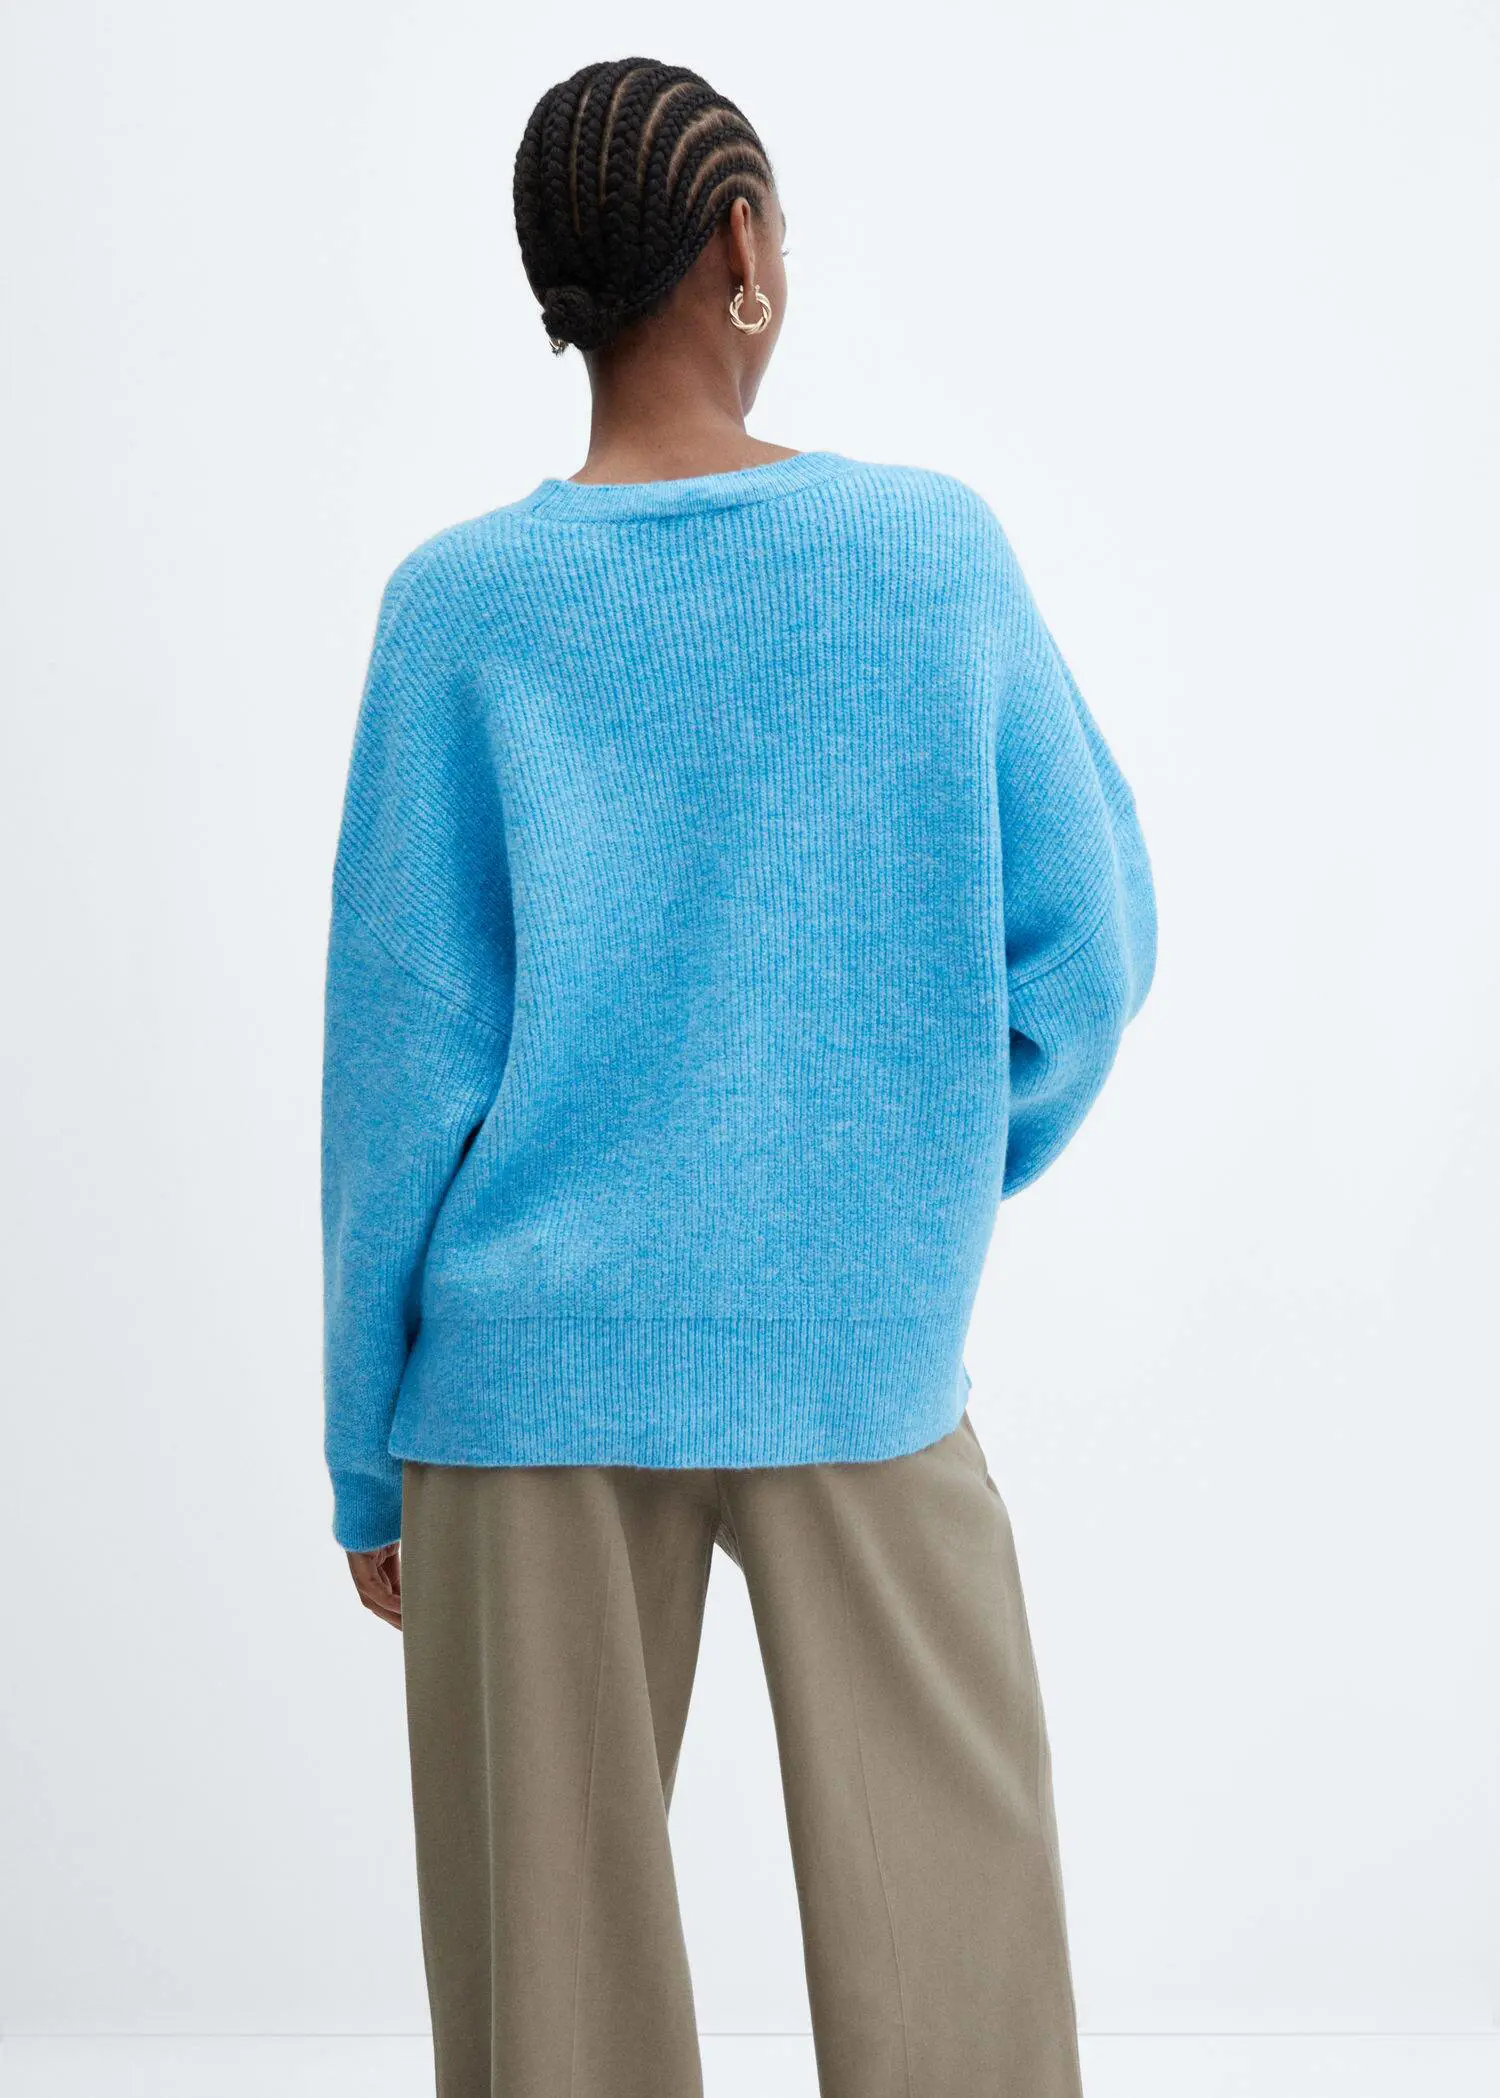 Mango Oversized sweater with dropped shoulders. 3